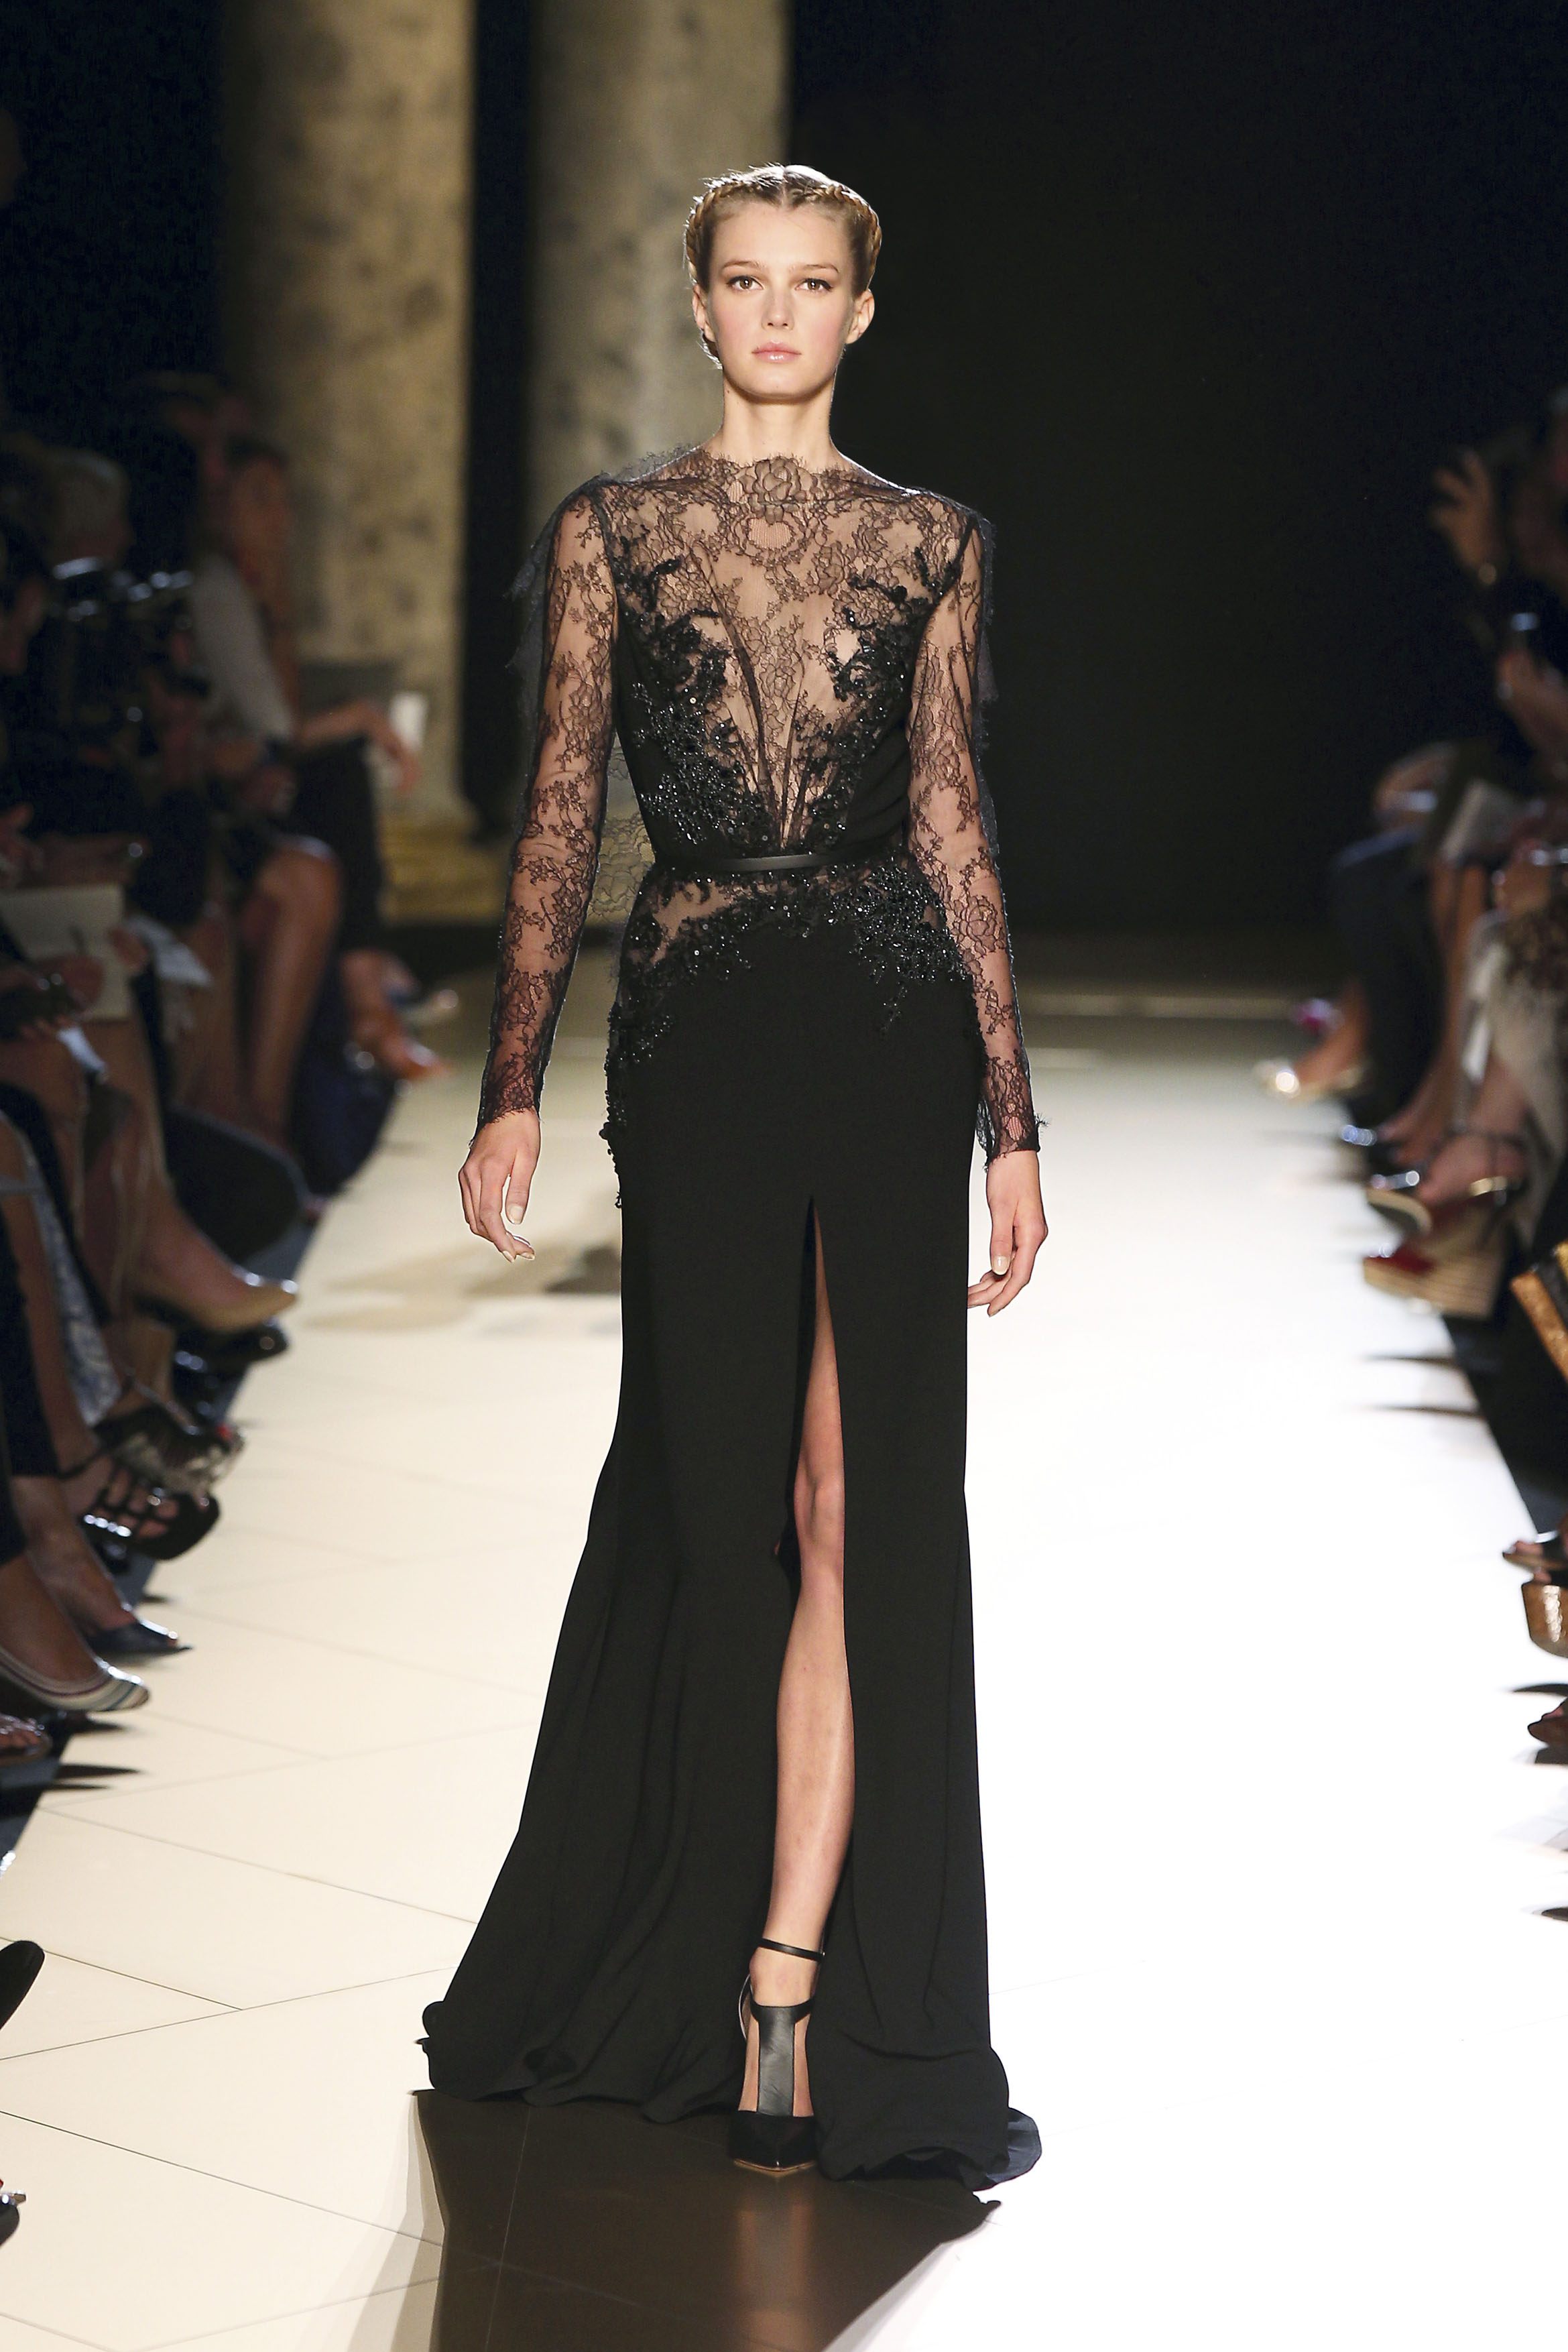 Fall 2012 Haute Couture: Elie Saab's Ottoman Spendours — CoutureNotebook